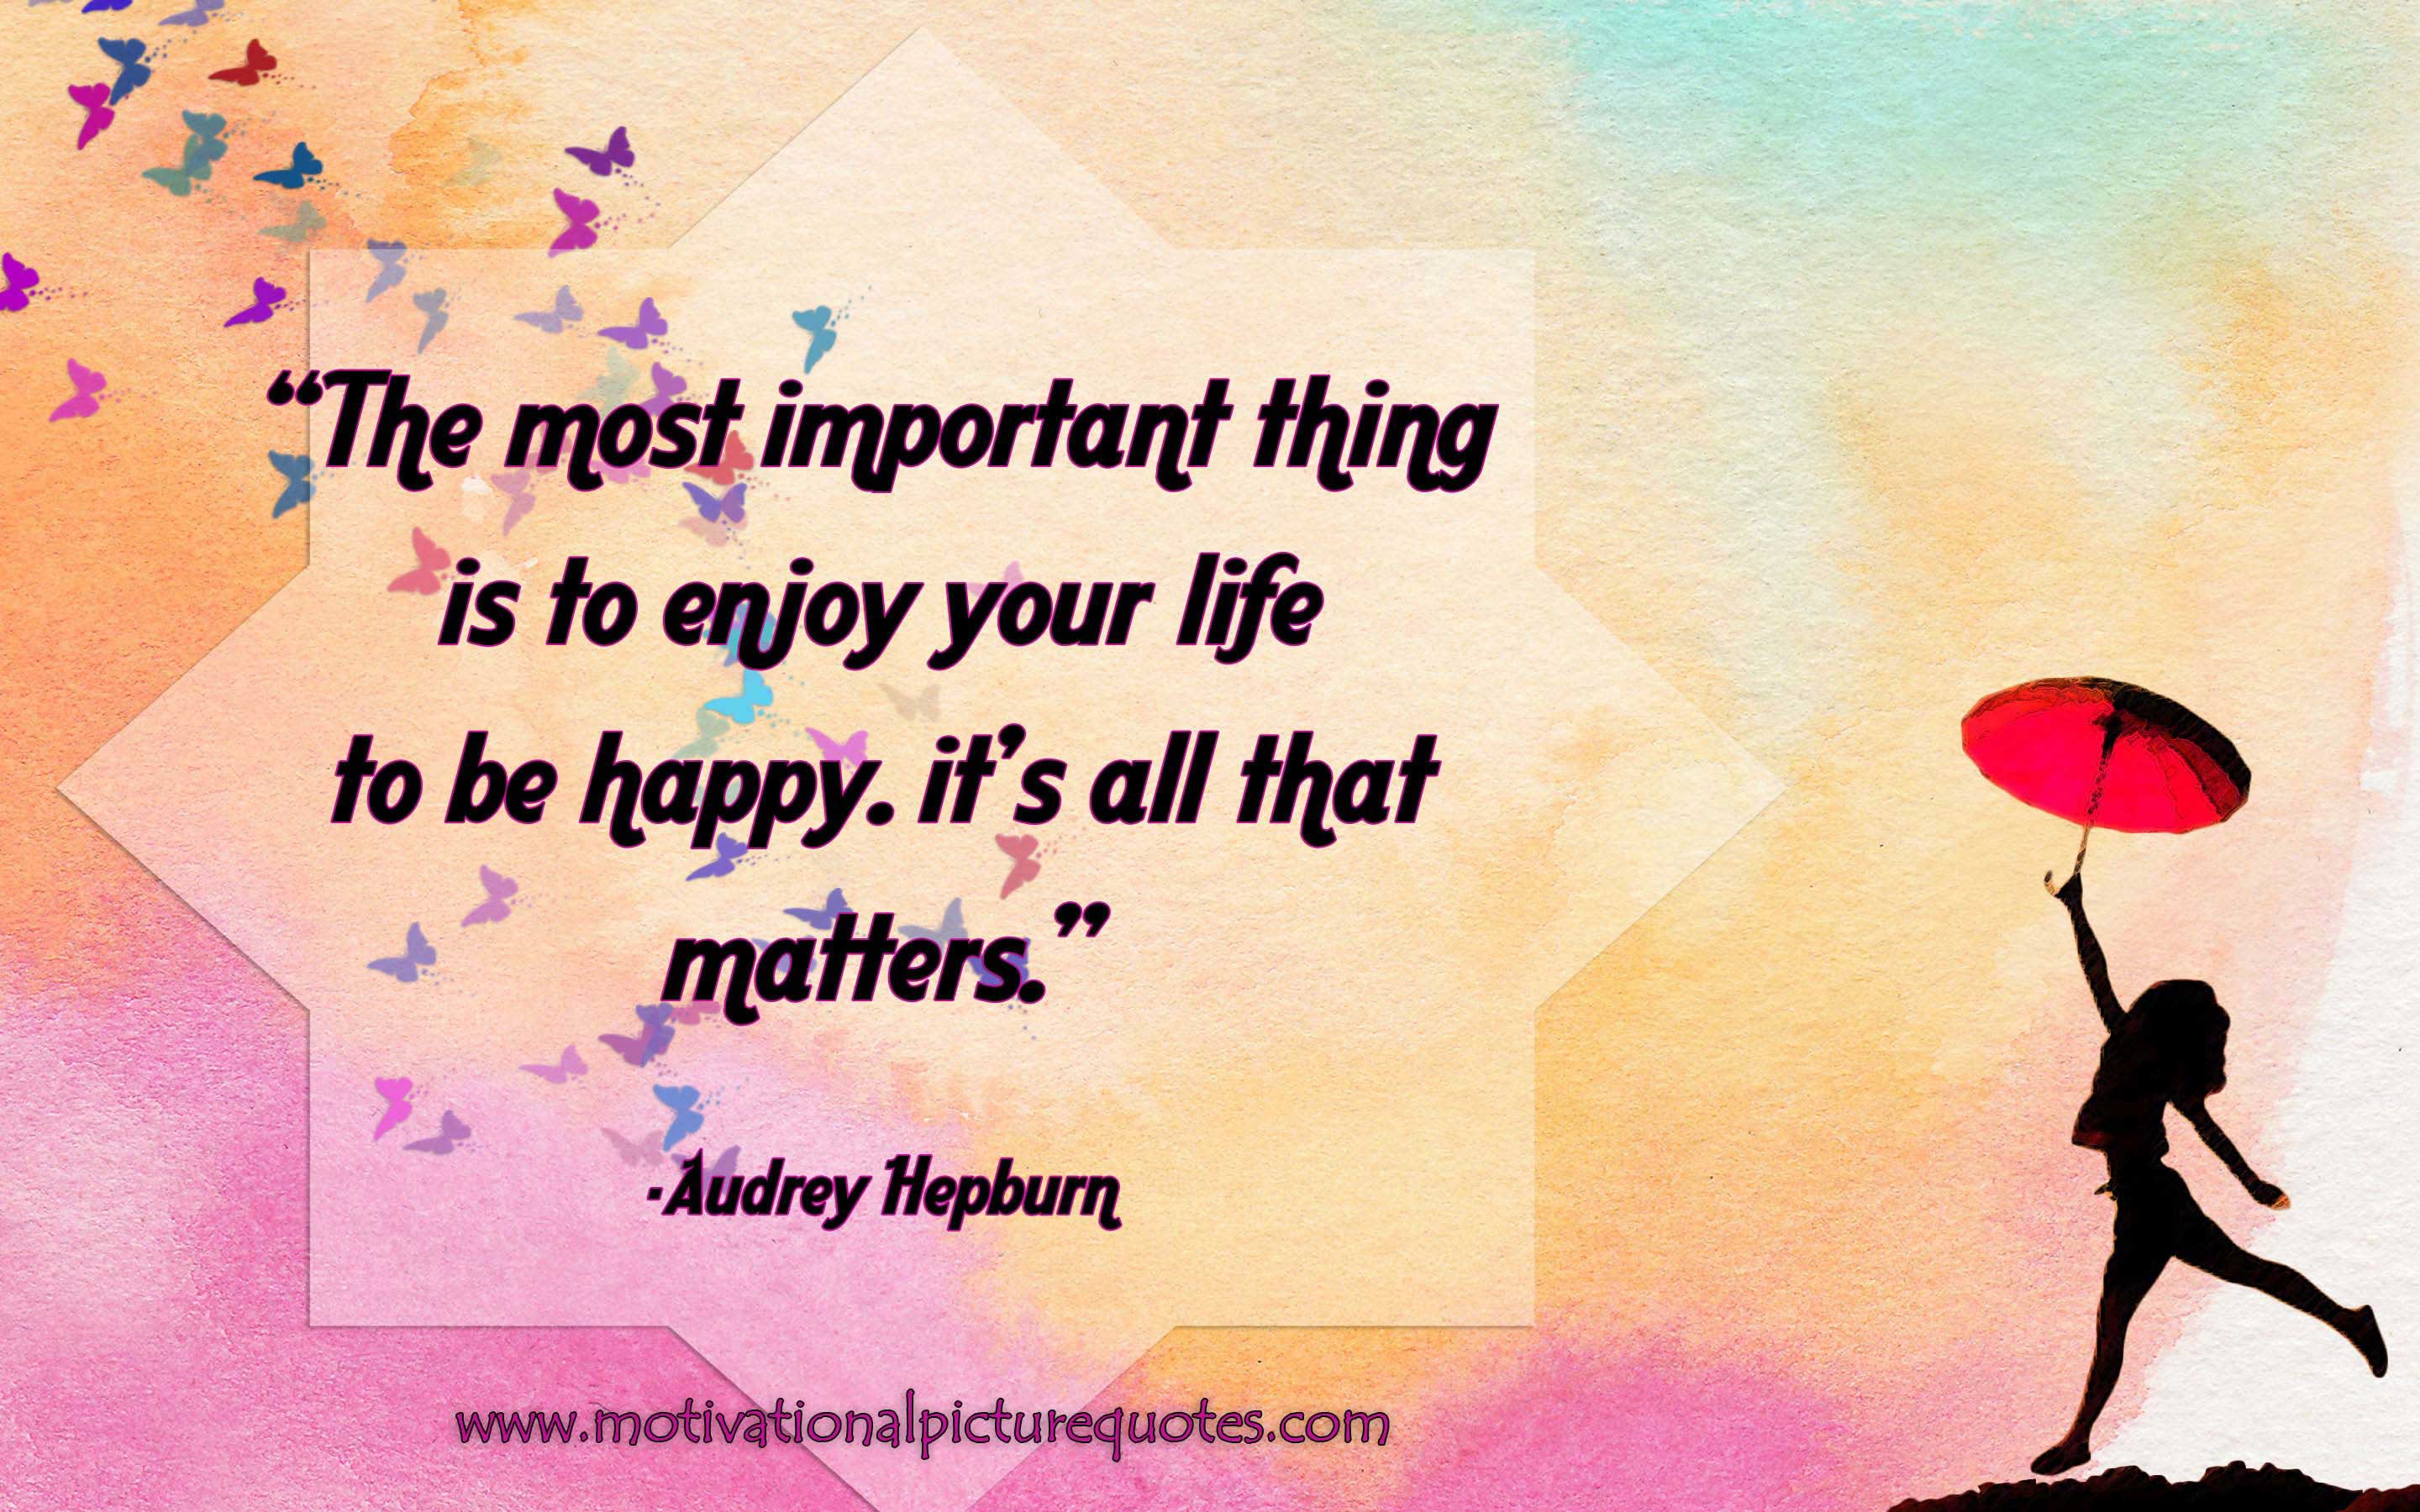 motivational quotes about life by Audrey Hepburn